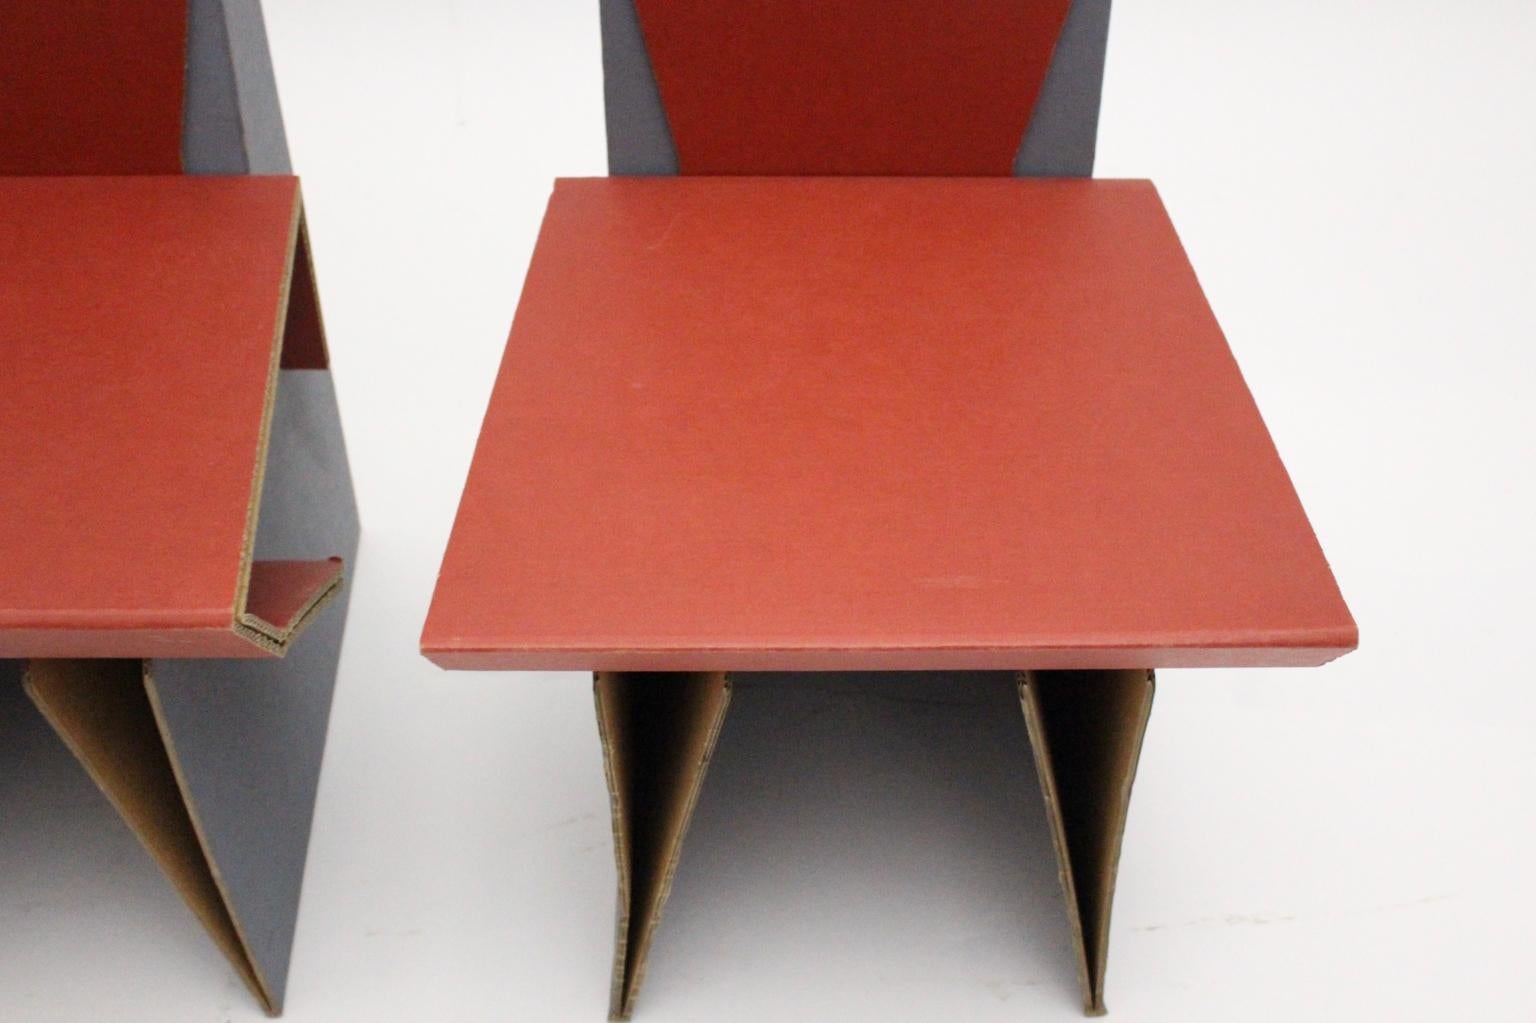 Modern pair of stable cardboard chairs in the colors red and blue circa 1990.
It is possible to taken apart some parts of the cardboard.
Very good vintage condition
approx. measures:
Width: 46 cm
Depth: 55 cm
Height: 83 cm
Seat height: 46 cm.